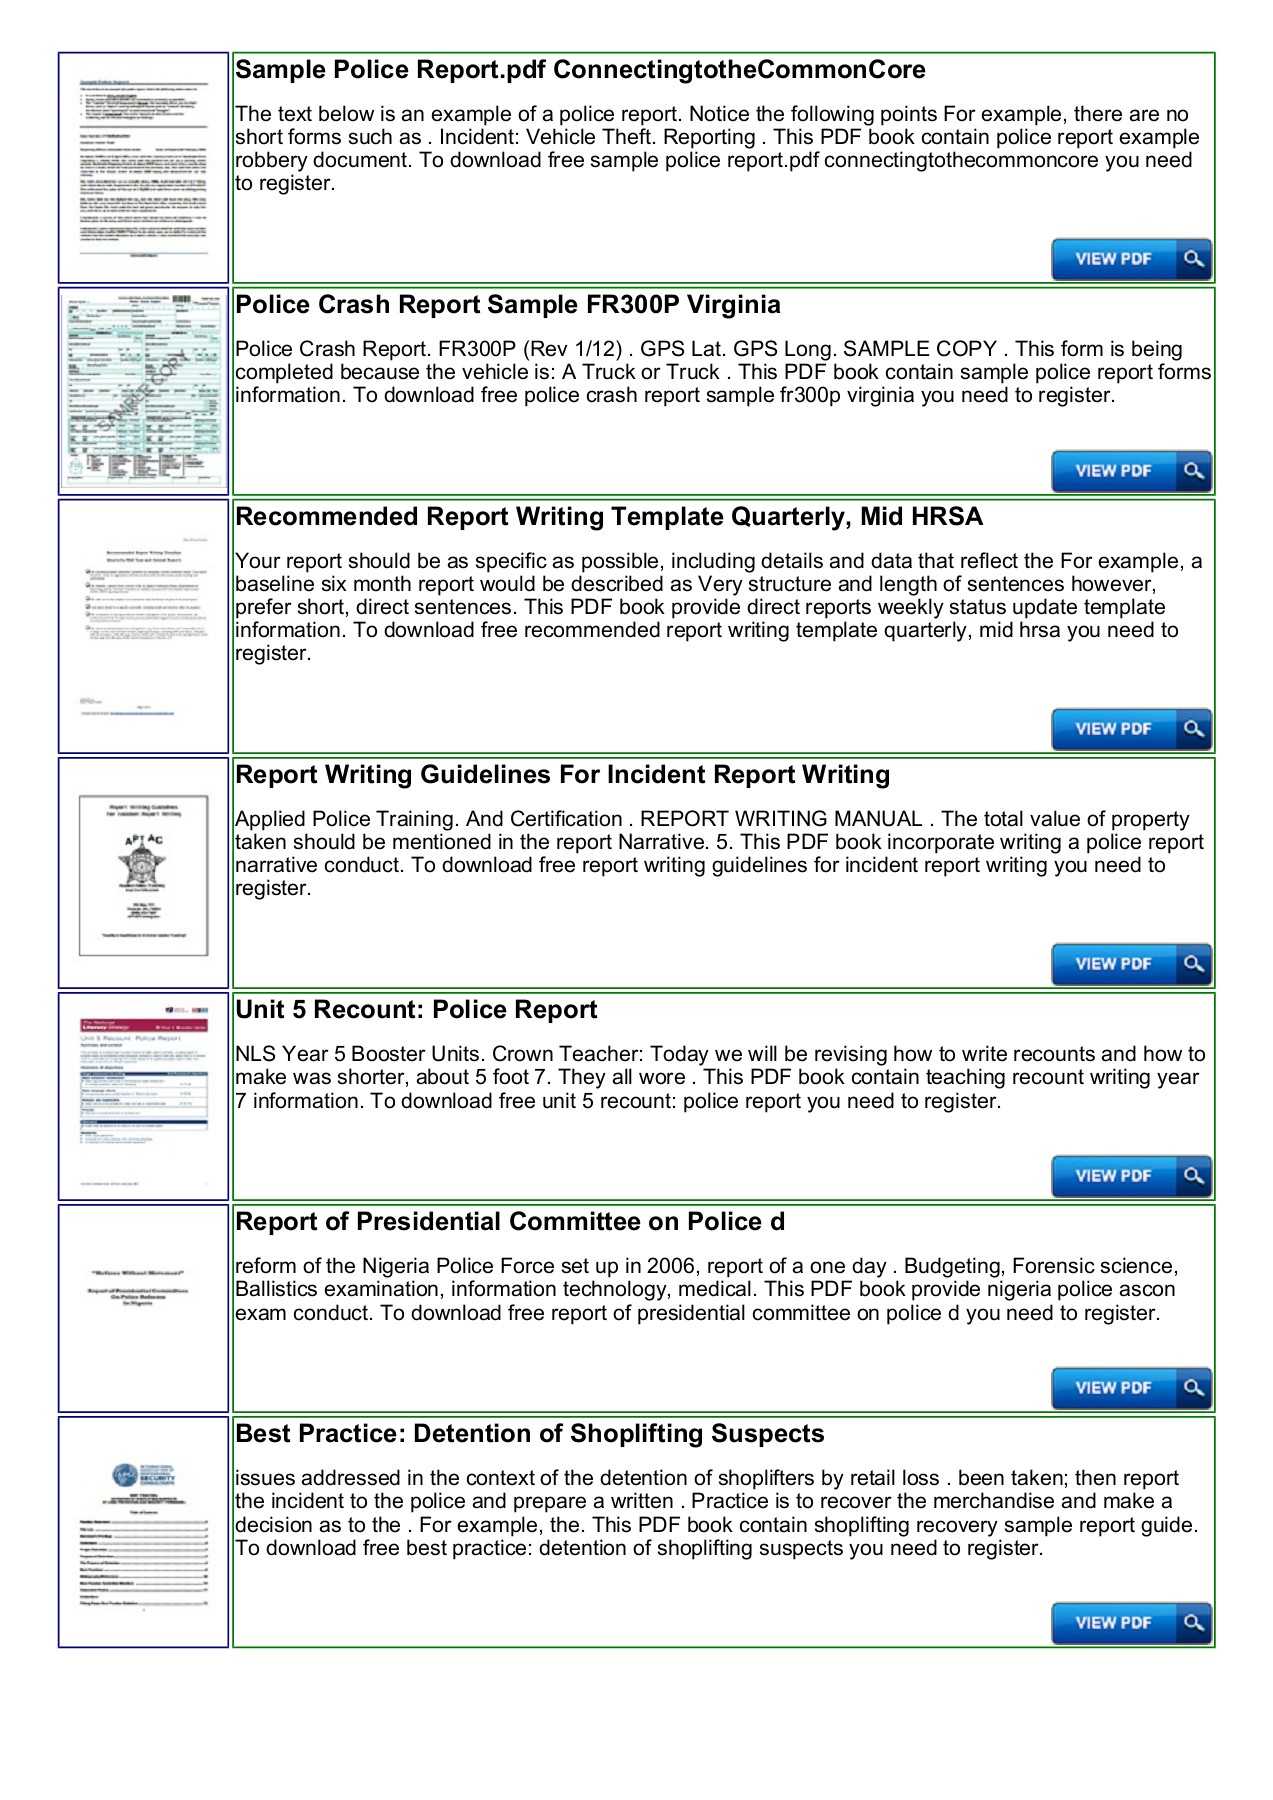 Police Shoplifting Report Writing Template Sample With Regard To Template On How To Write A Report